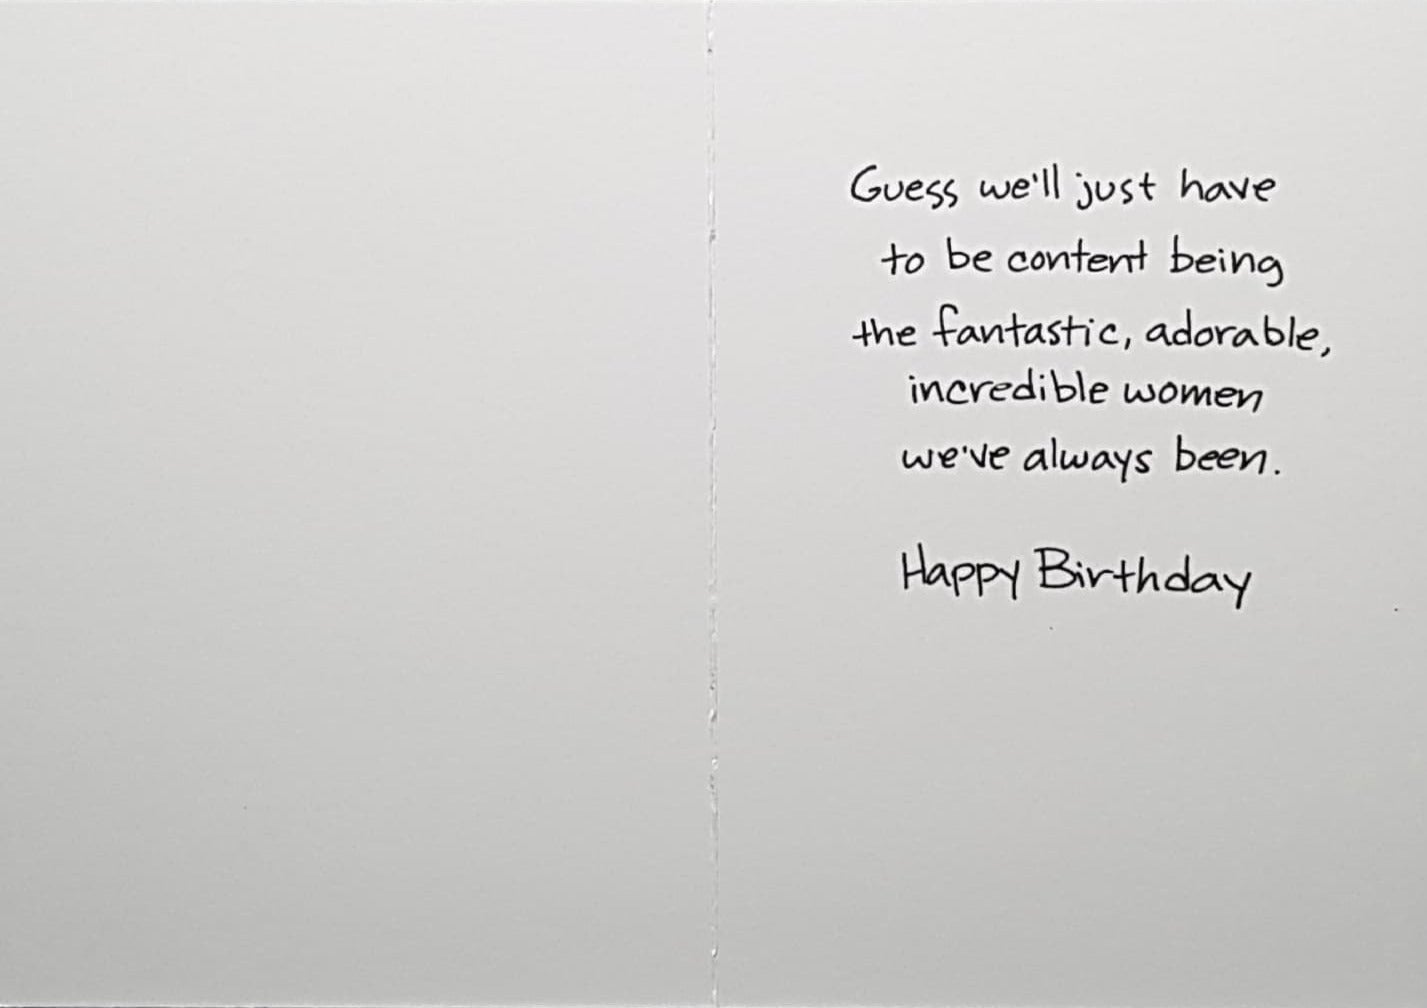 Birthday Card - Can't Change Who We Are